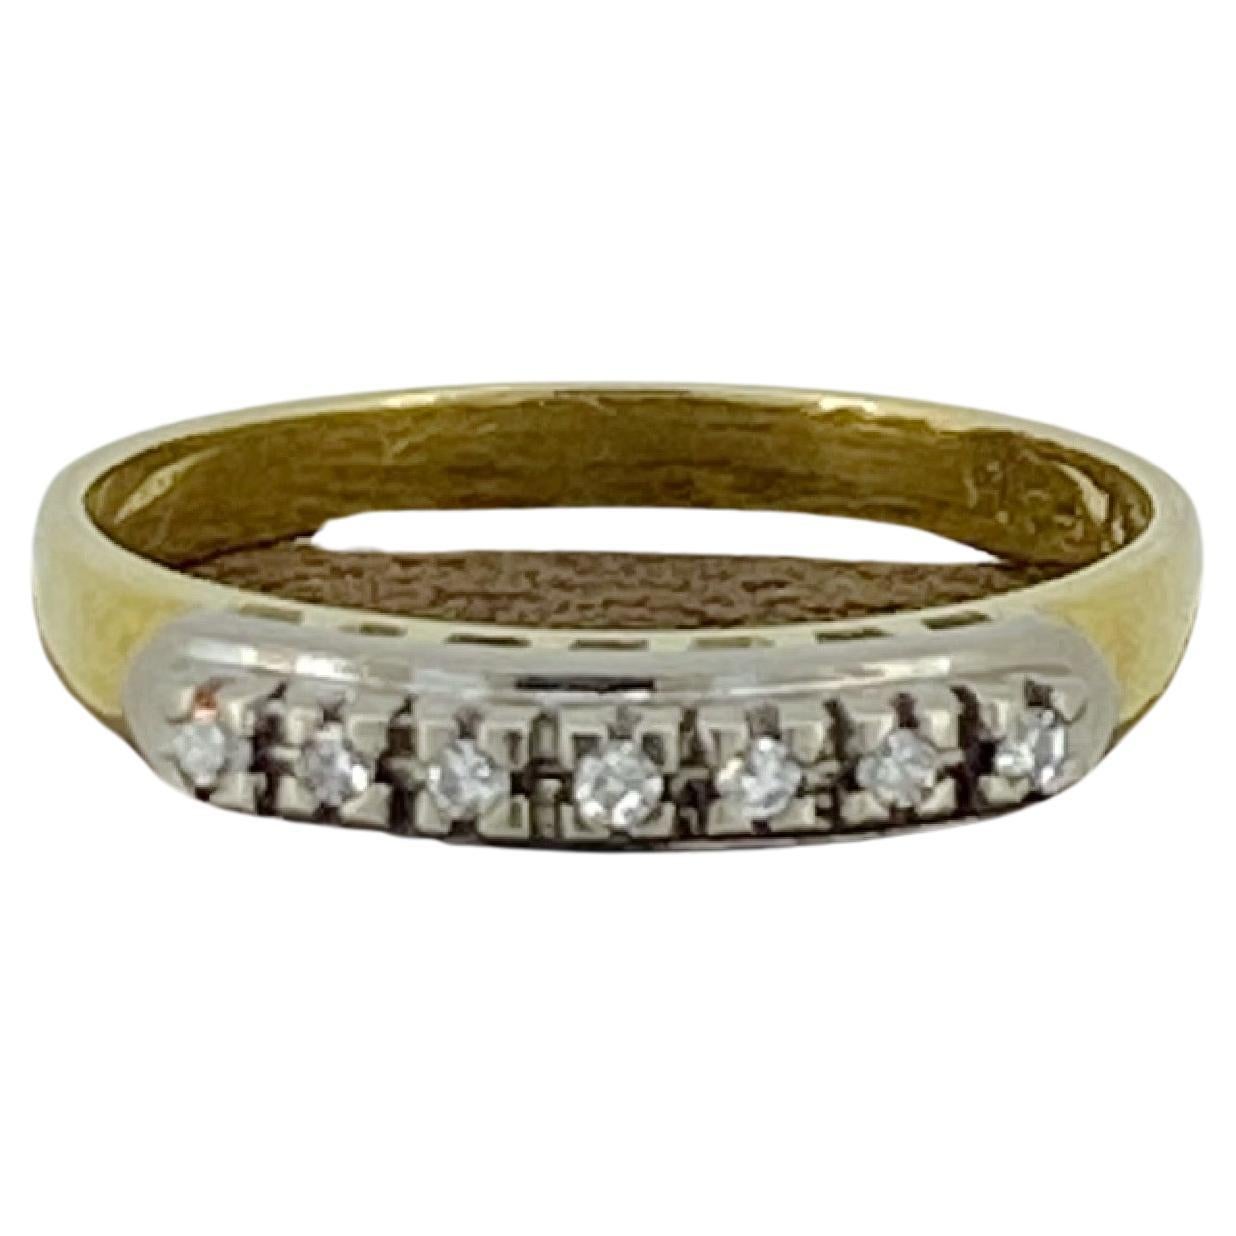 7-Stone "Dearest" Style Diamond Handmade Band in 18K Yellow Gold & Platinum. For Sale